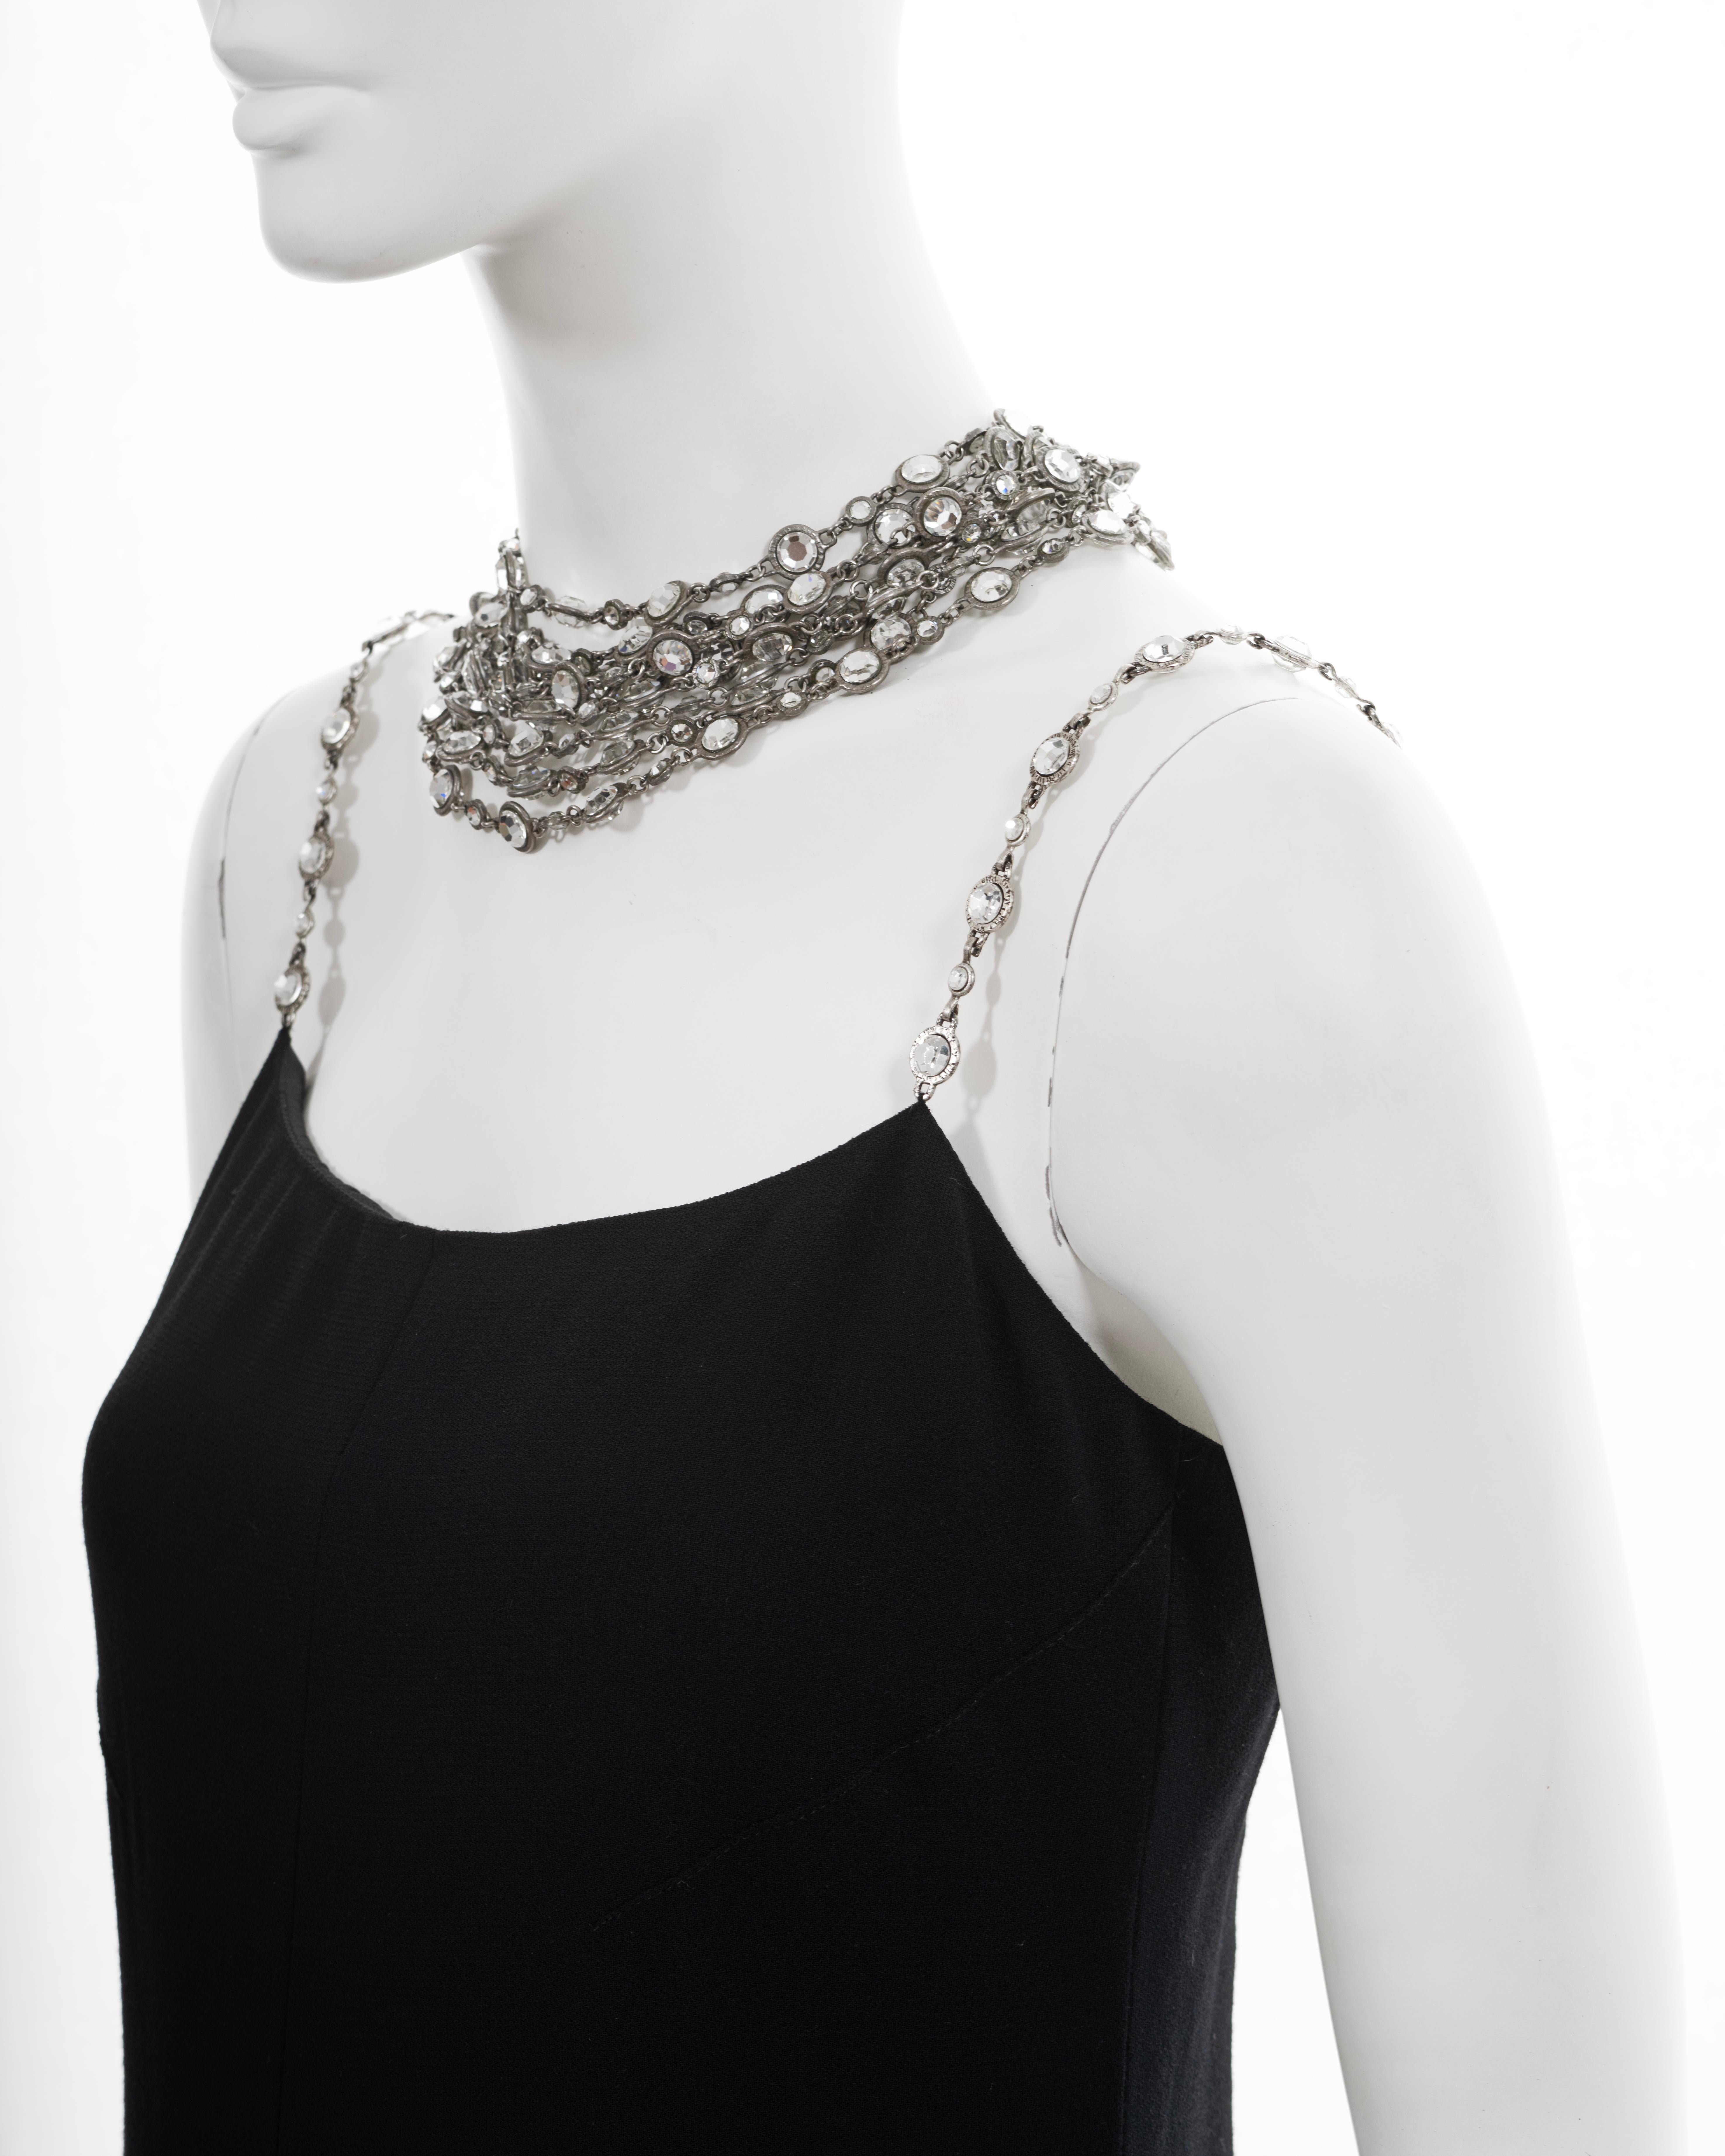 Chanel by Karl Lagerfeld black evening dress with crystal jewellery set, ss 1998 For Sale 14